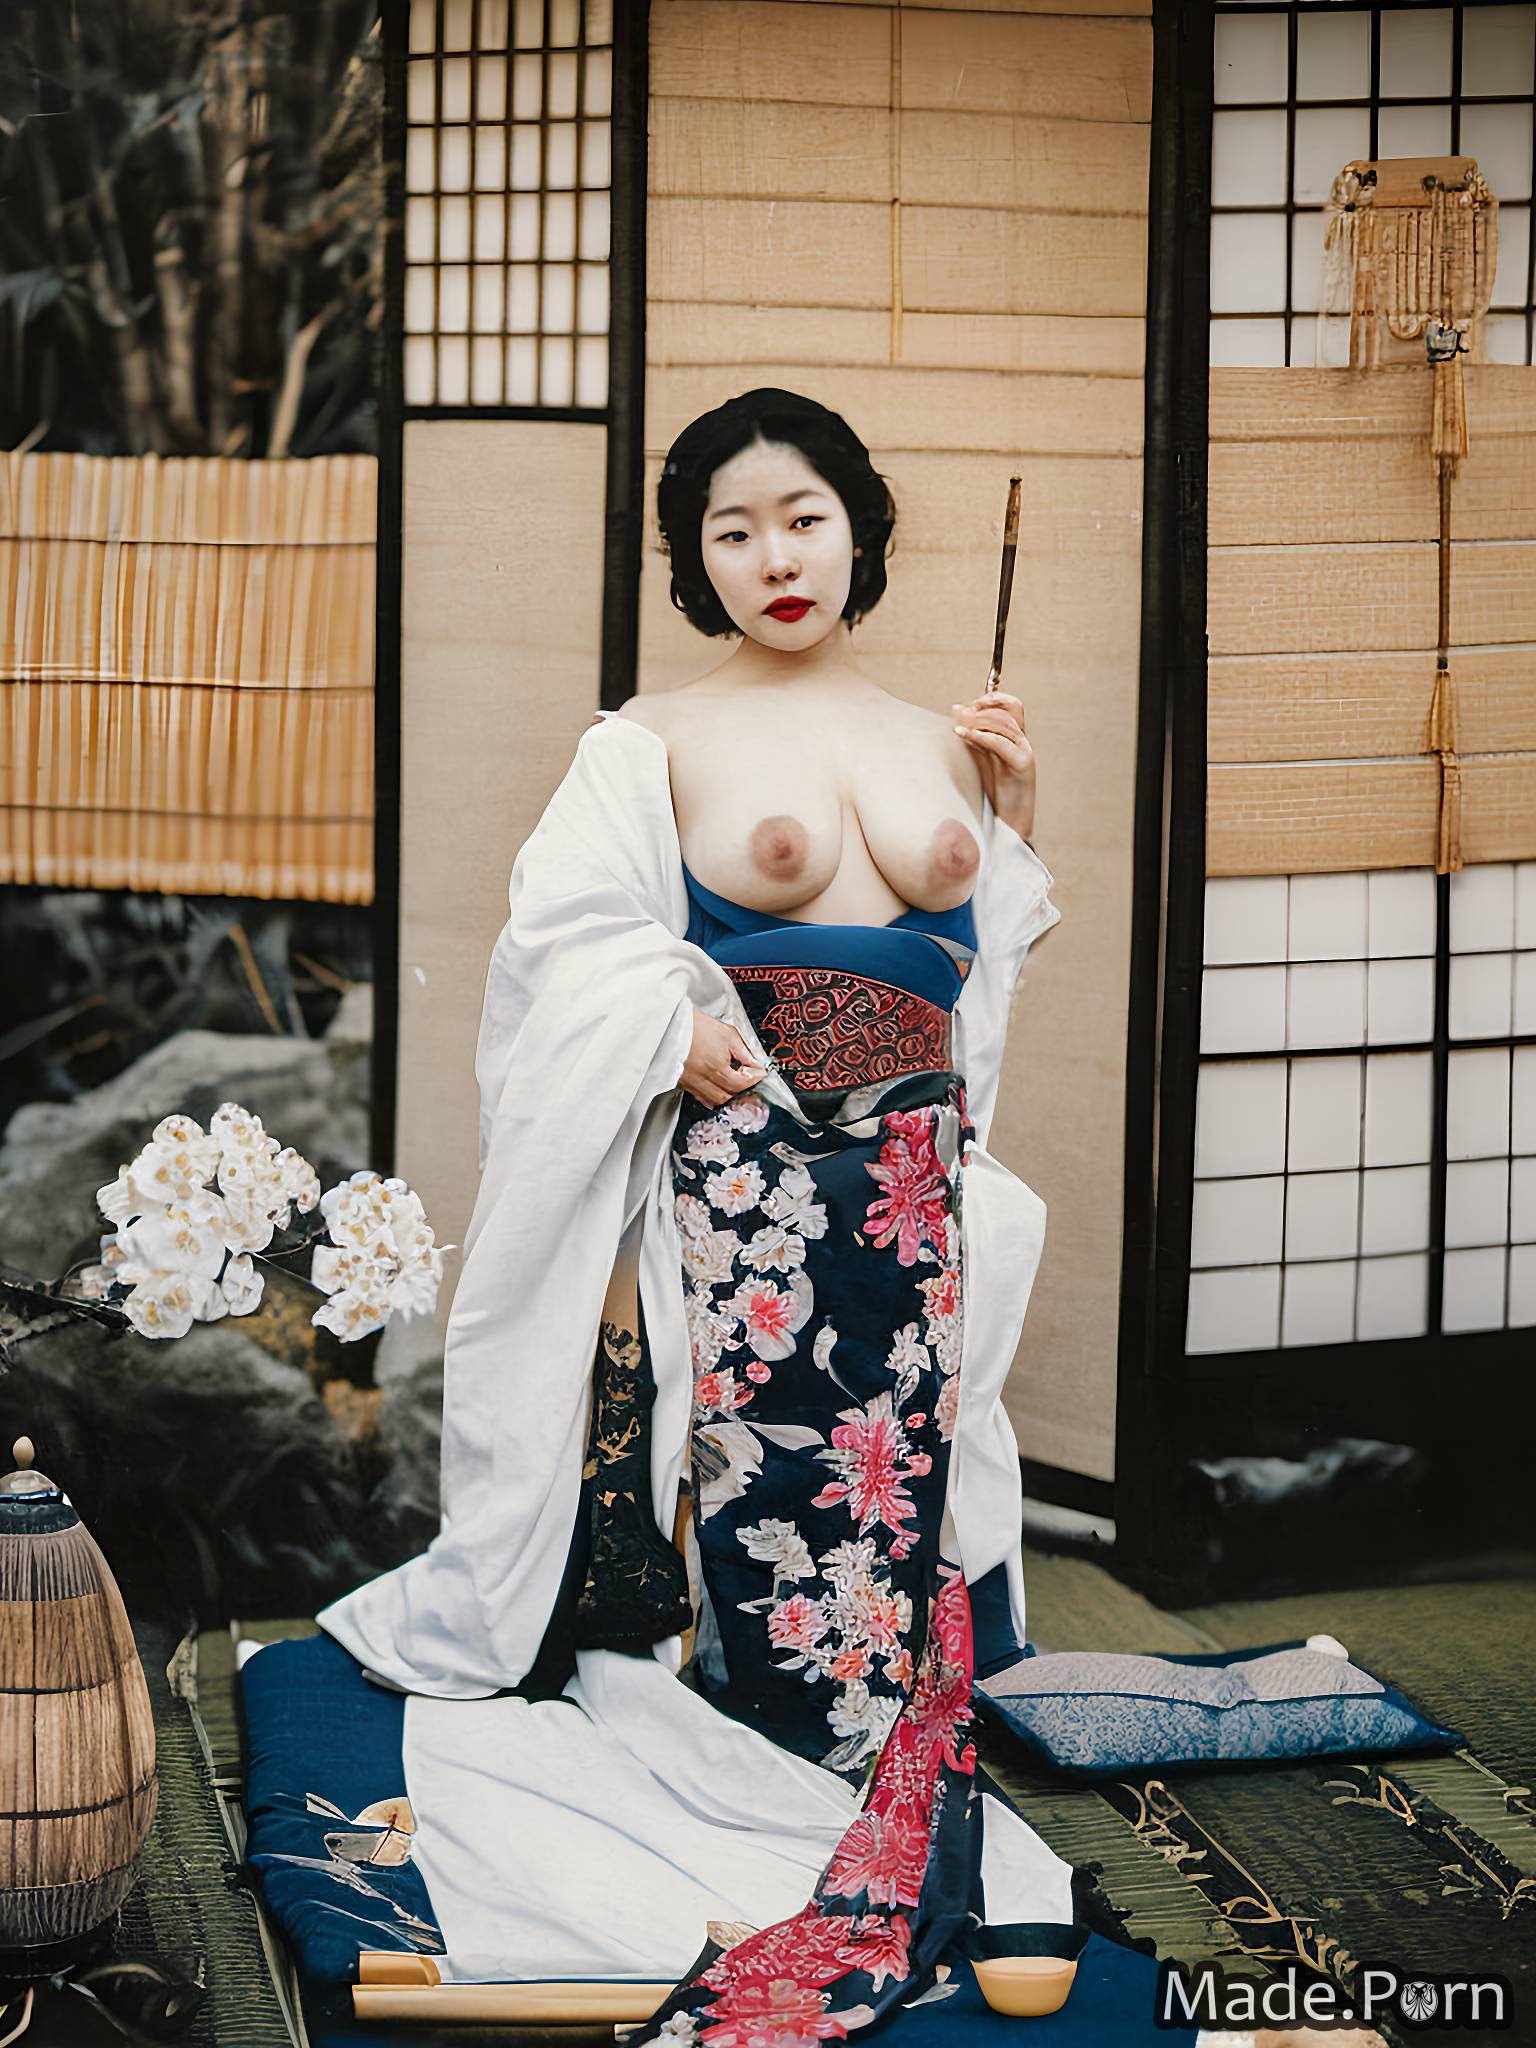 Porn image of geisha 20 partially nude saggy tits skinny japanese vintage  created by AI